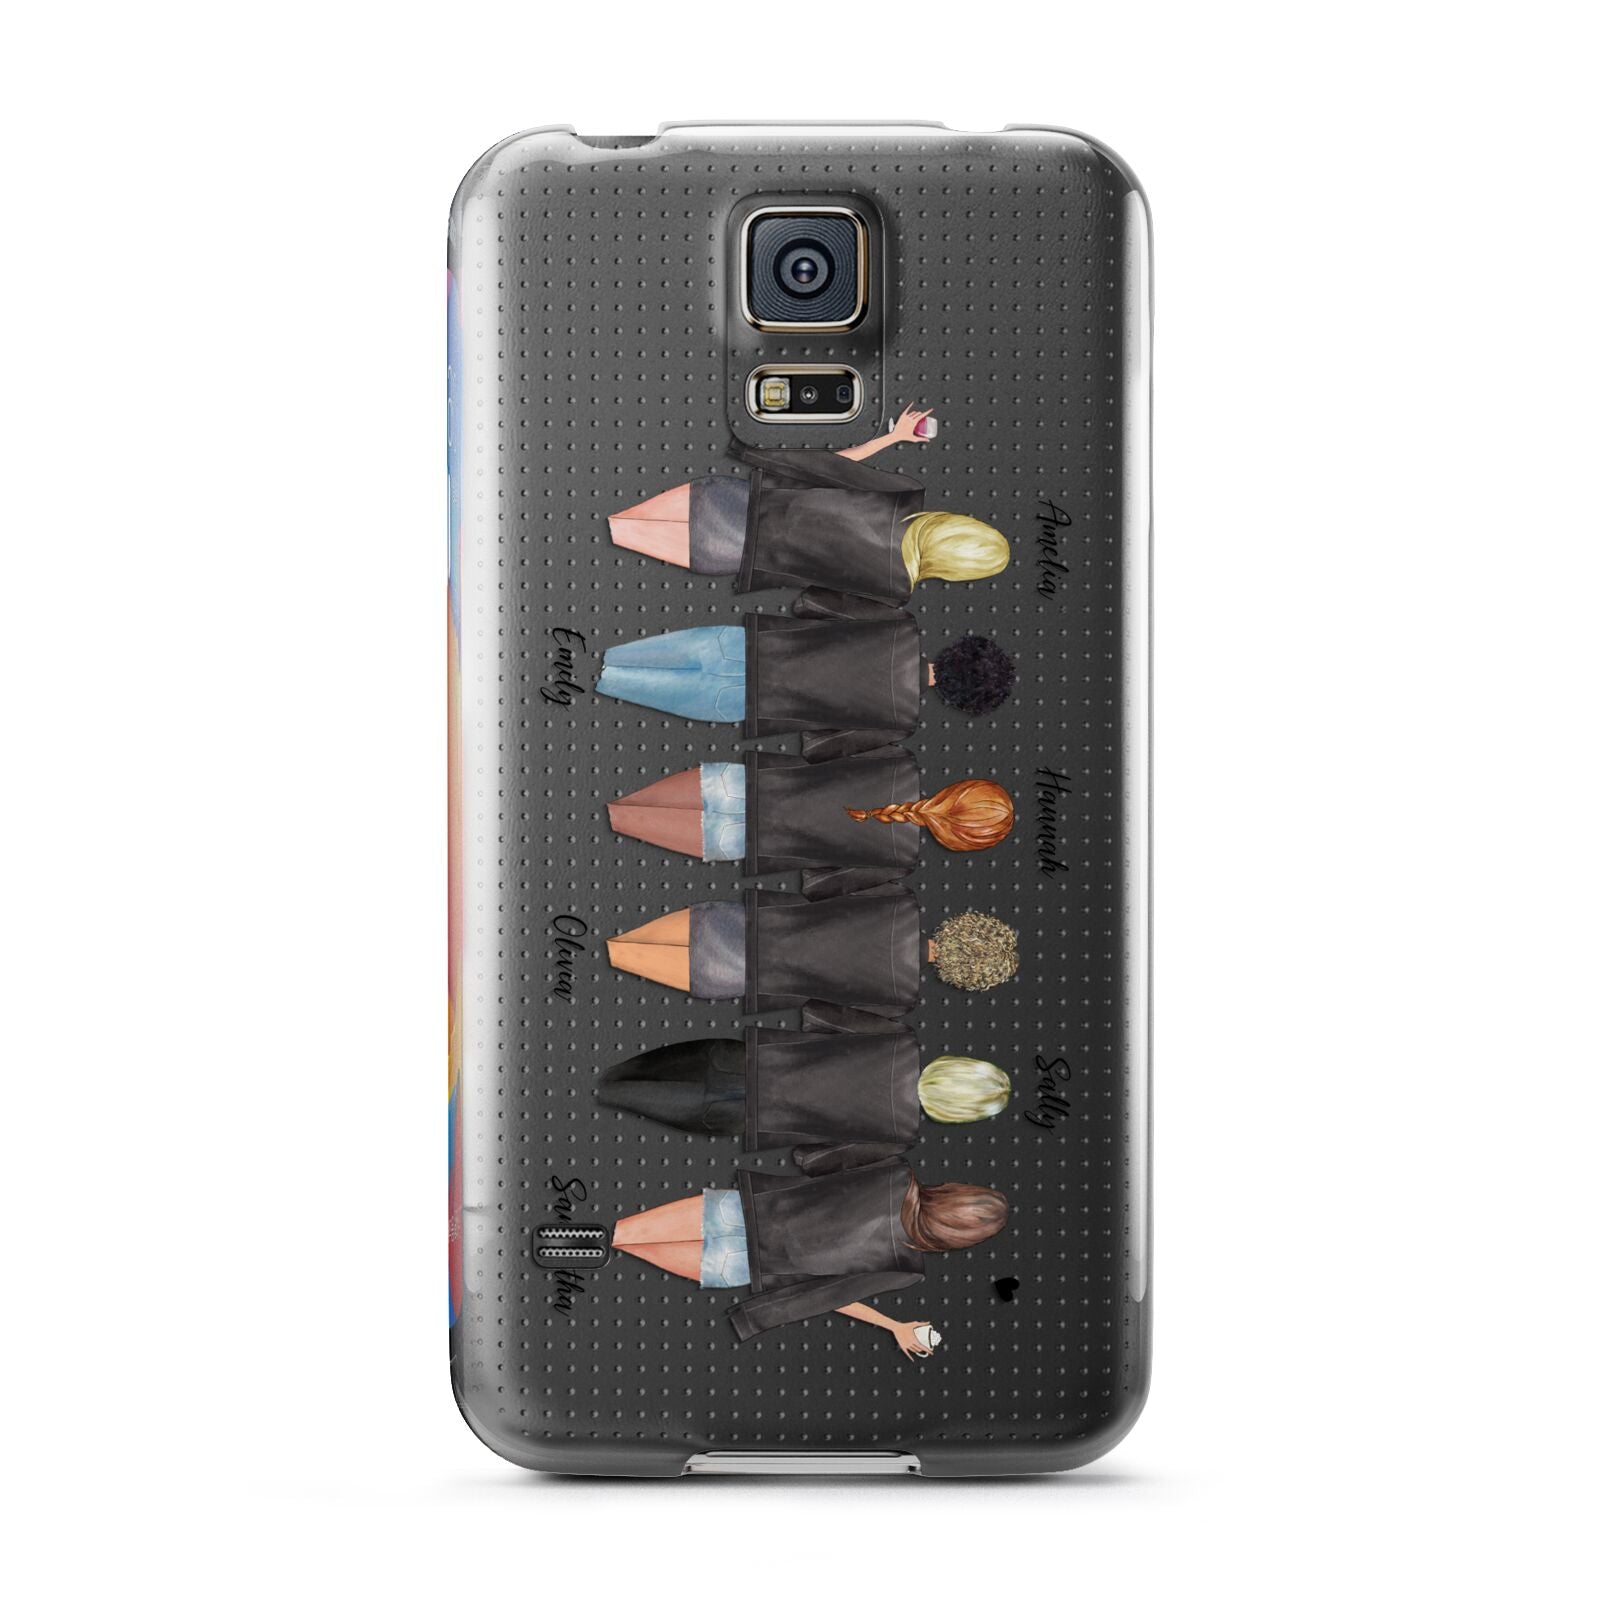 6 Best Friends with Names Samsung Galaxy S5 Case